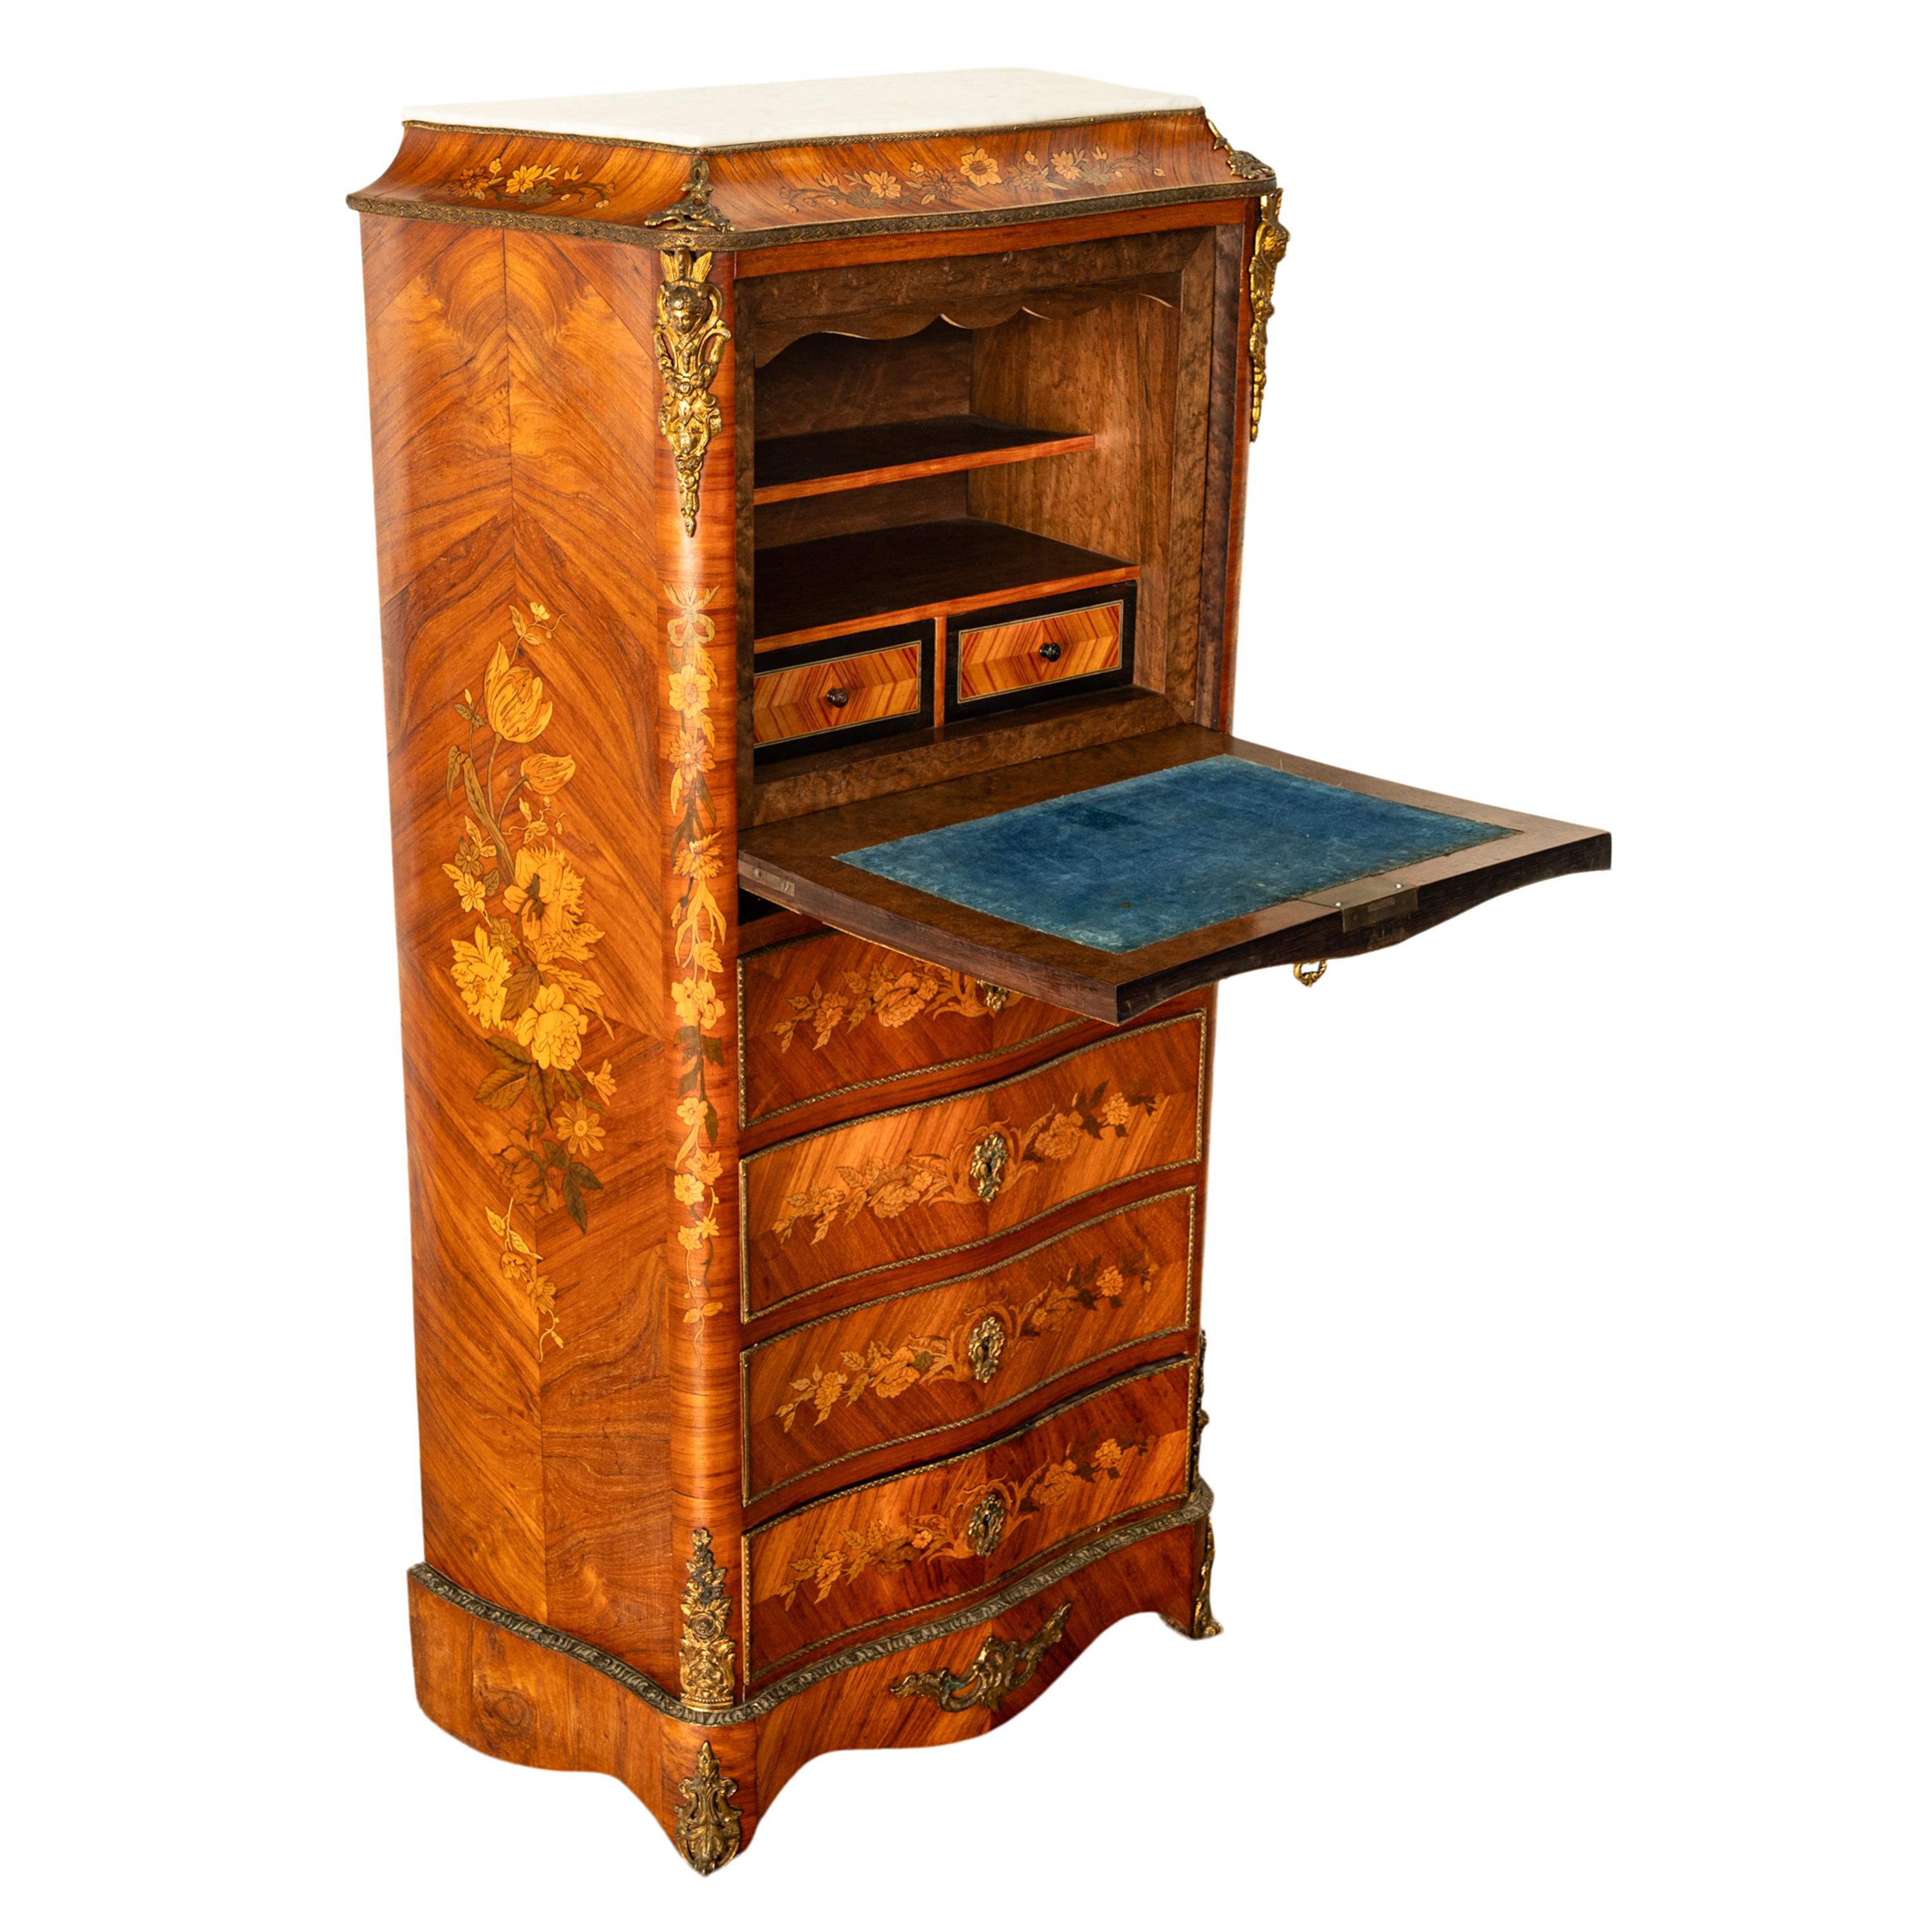 Fine Antique French Louis XV Marquetry Rosewood Ormolu Secretaire Abattant 1880 For Sale 6